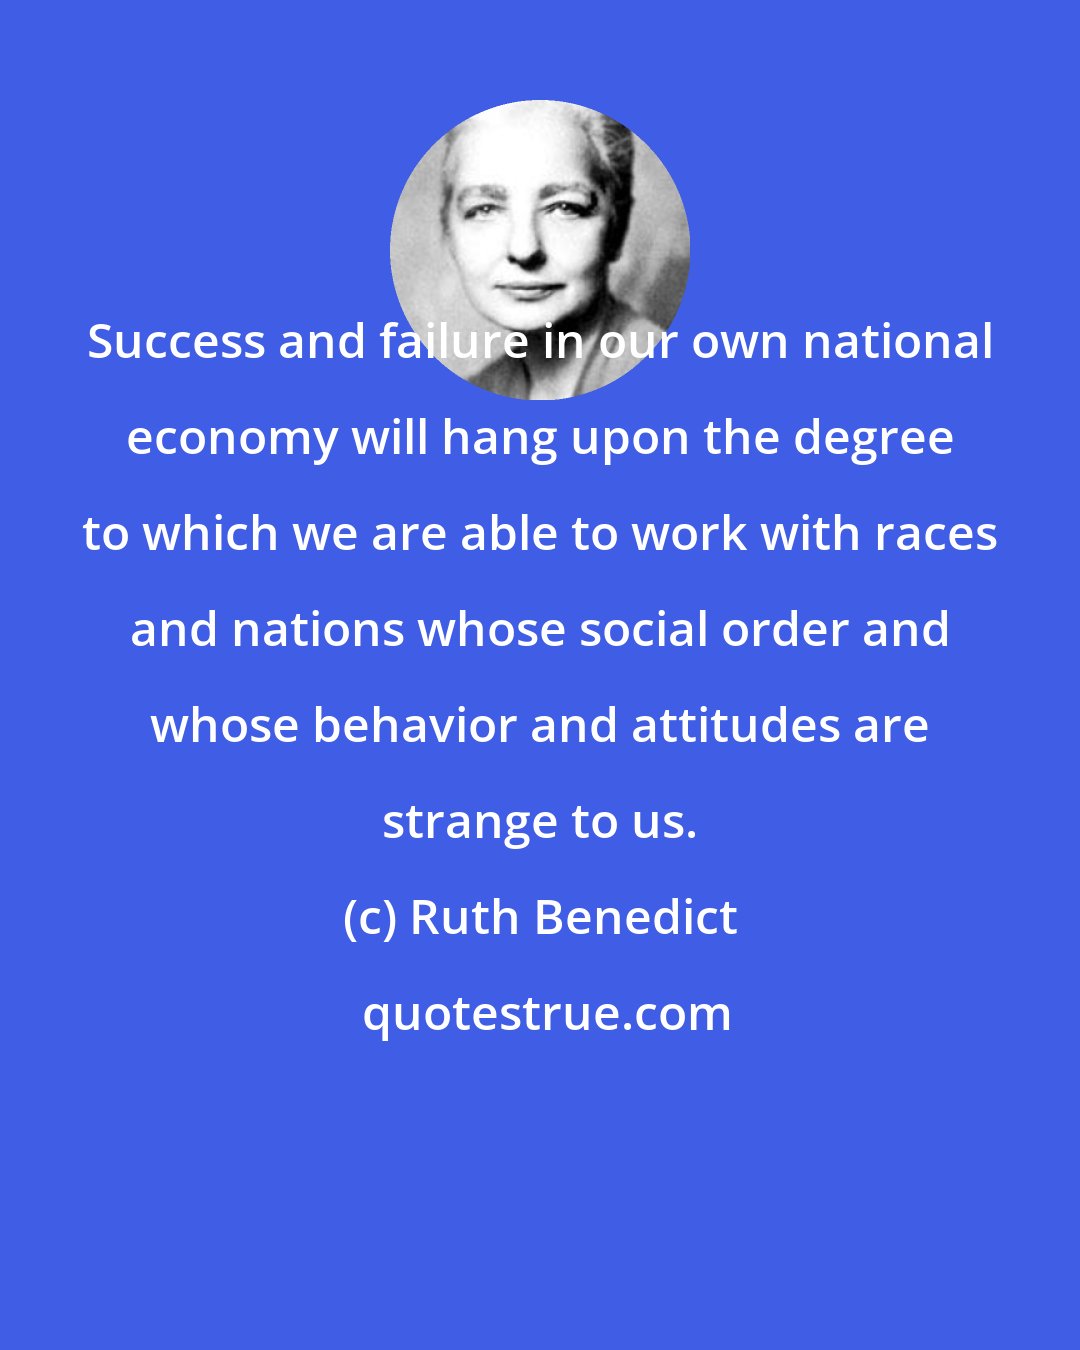 Ruth Benedict: Success and failure in our own national economy will hang upon the degree to which we are able to work with races and nations whose social order and whose behavior and attitudes are strange to us.